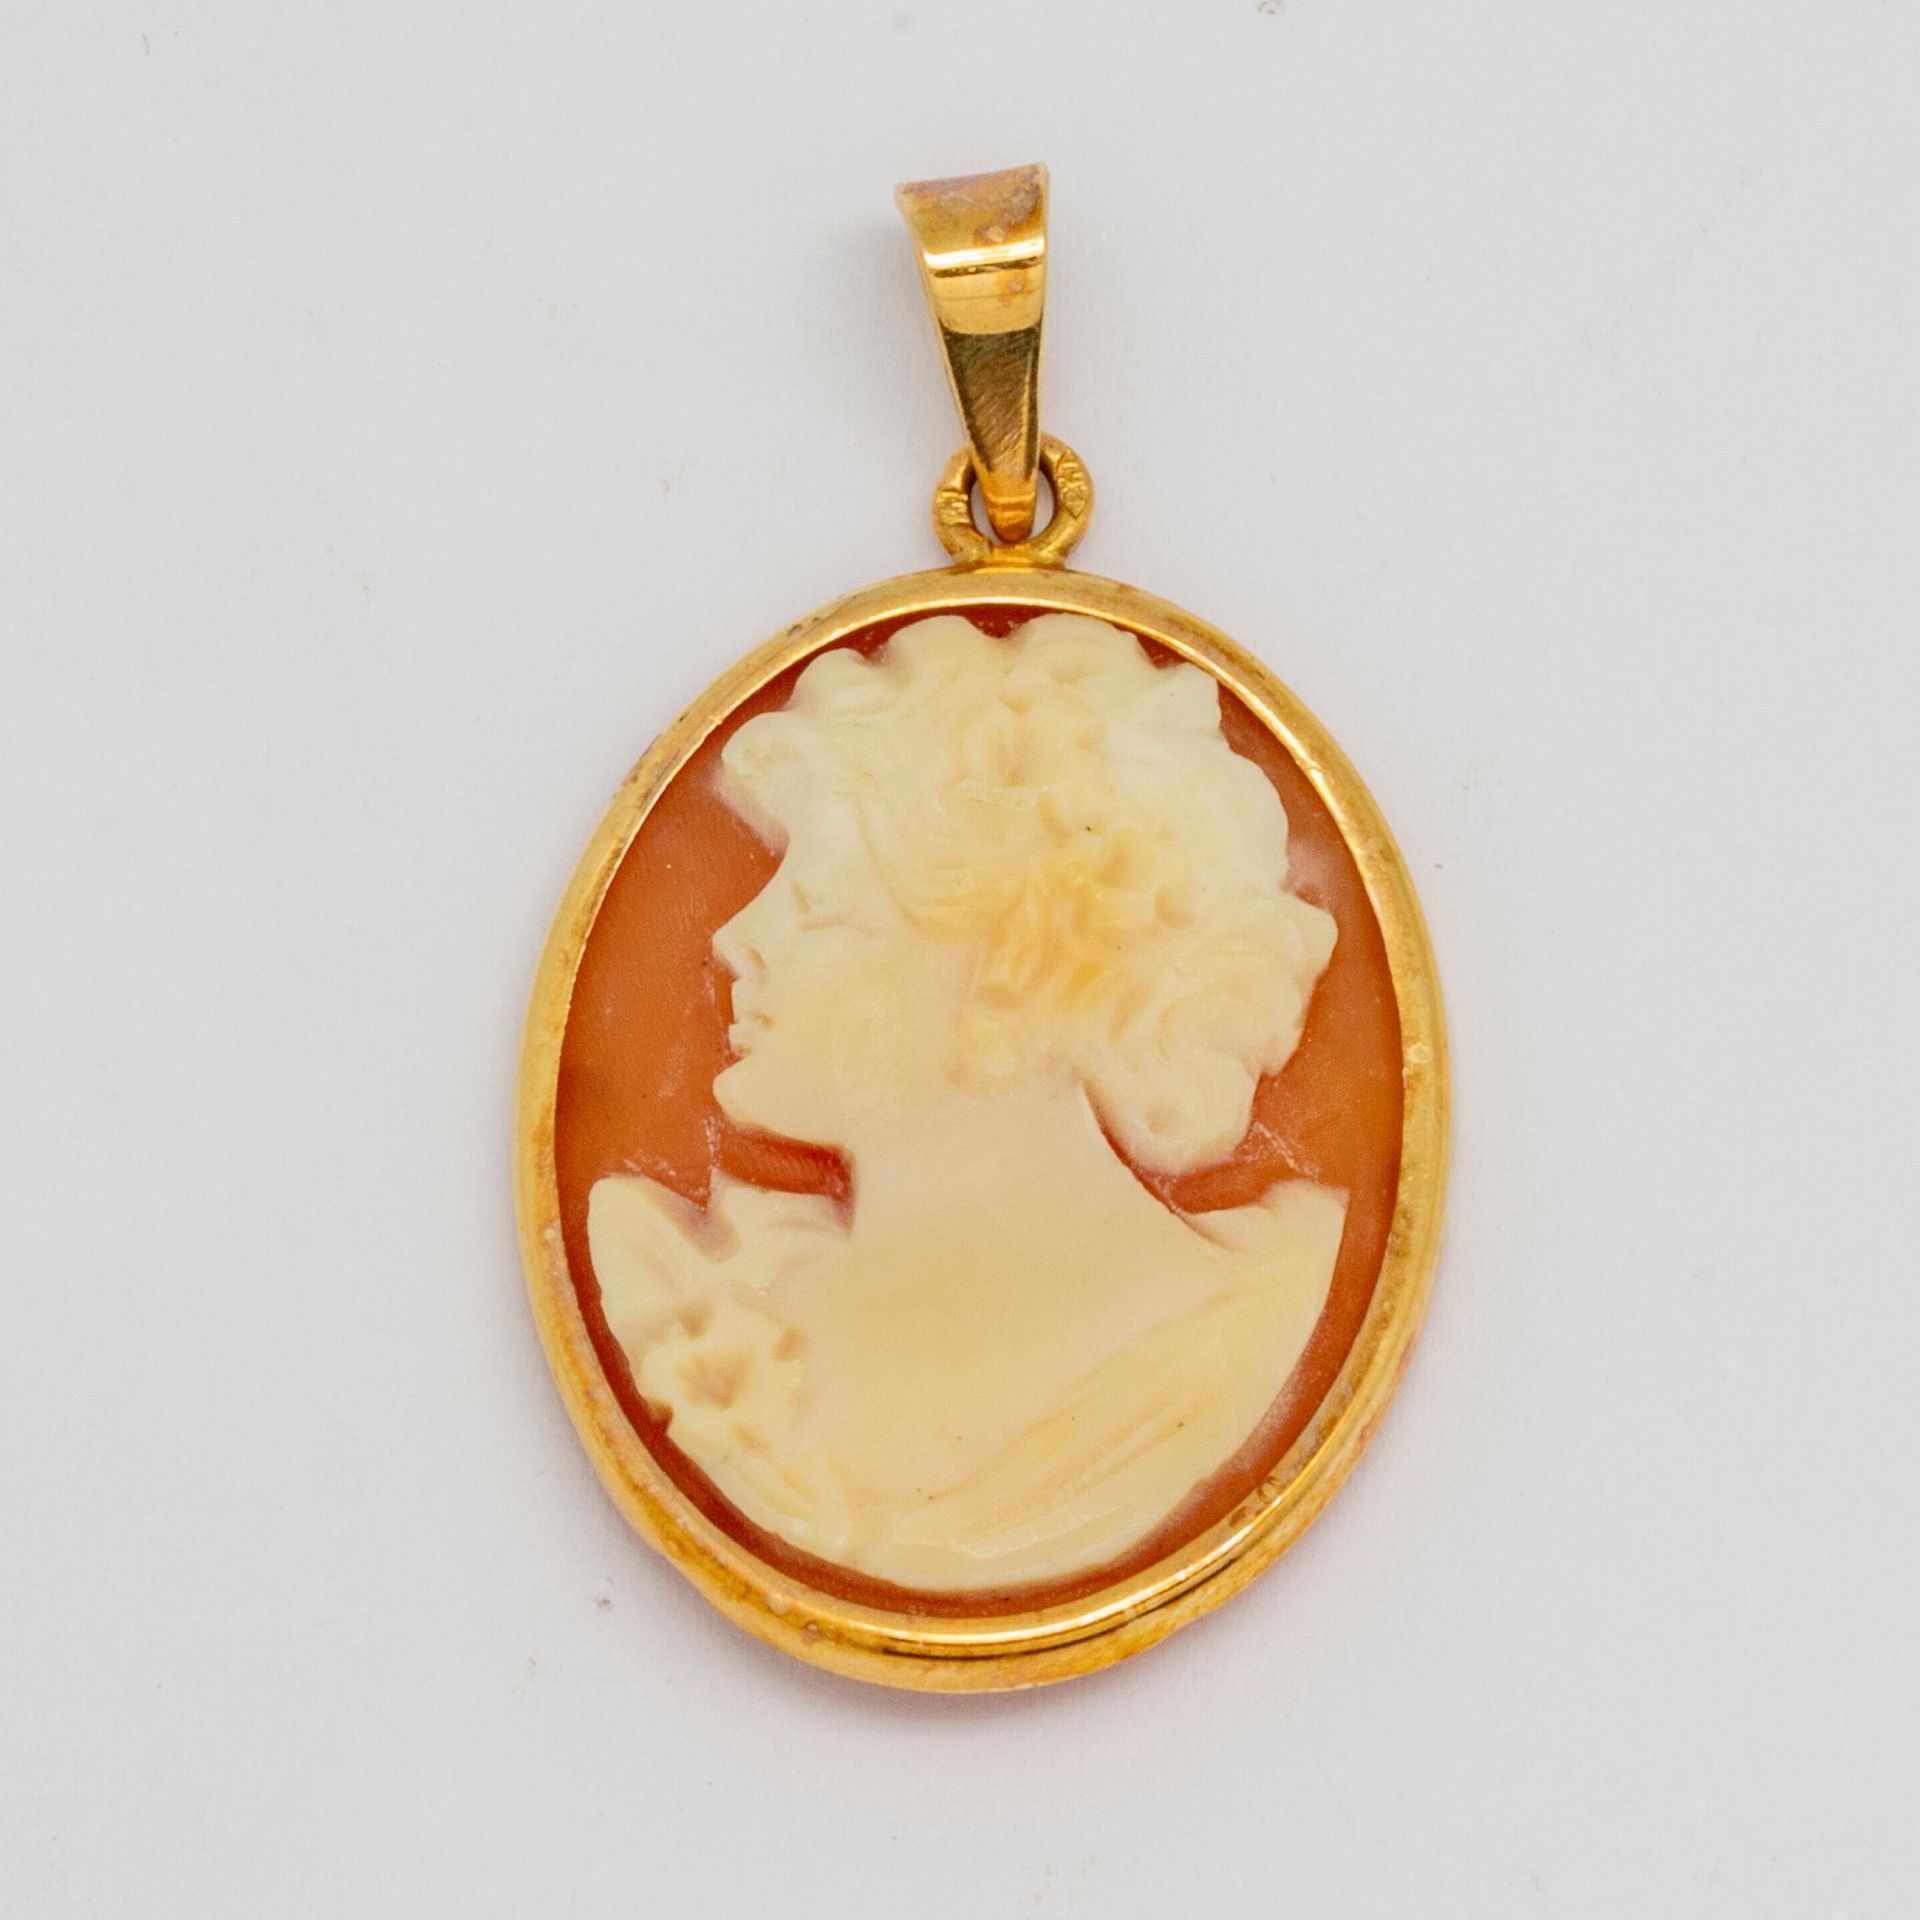 Null Cameo, yellow gold setting
Gross weight : 2,9 g